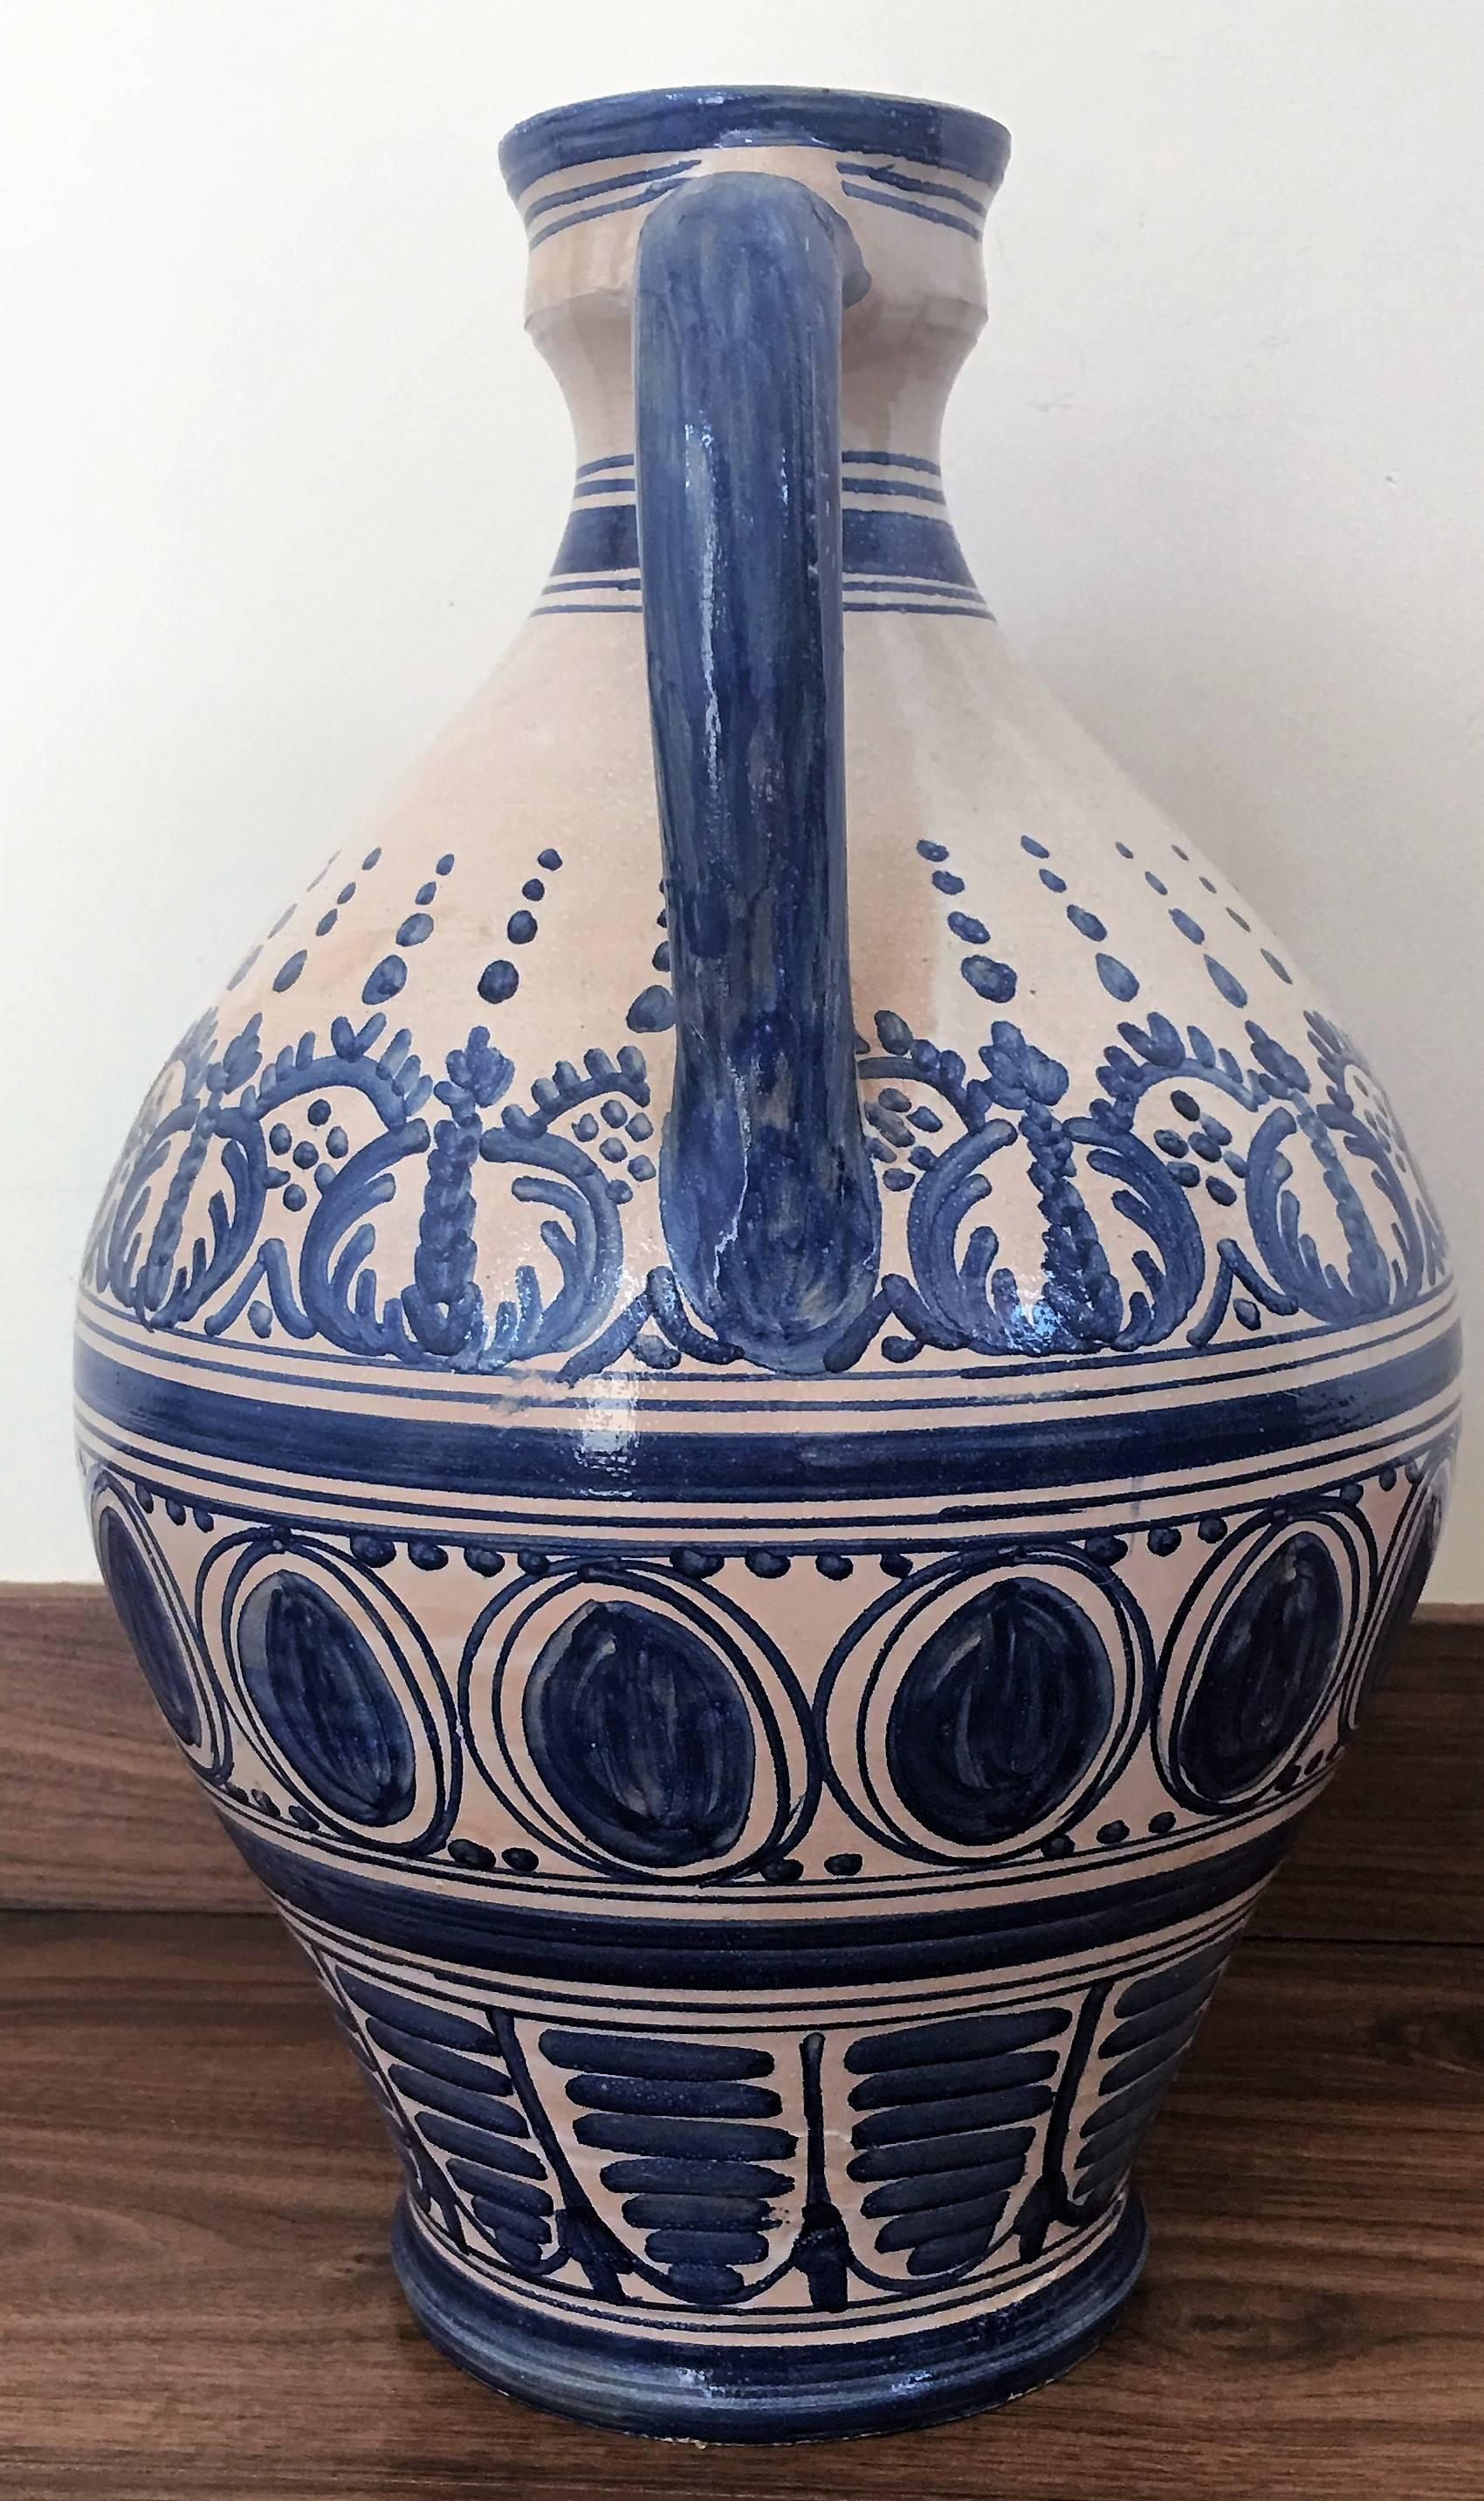 A striking Spanish glazed earthenware two-handled blue and white painted urn with foliate molded handles, the body underglaze blue decorated.